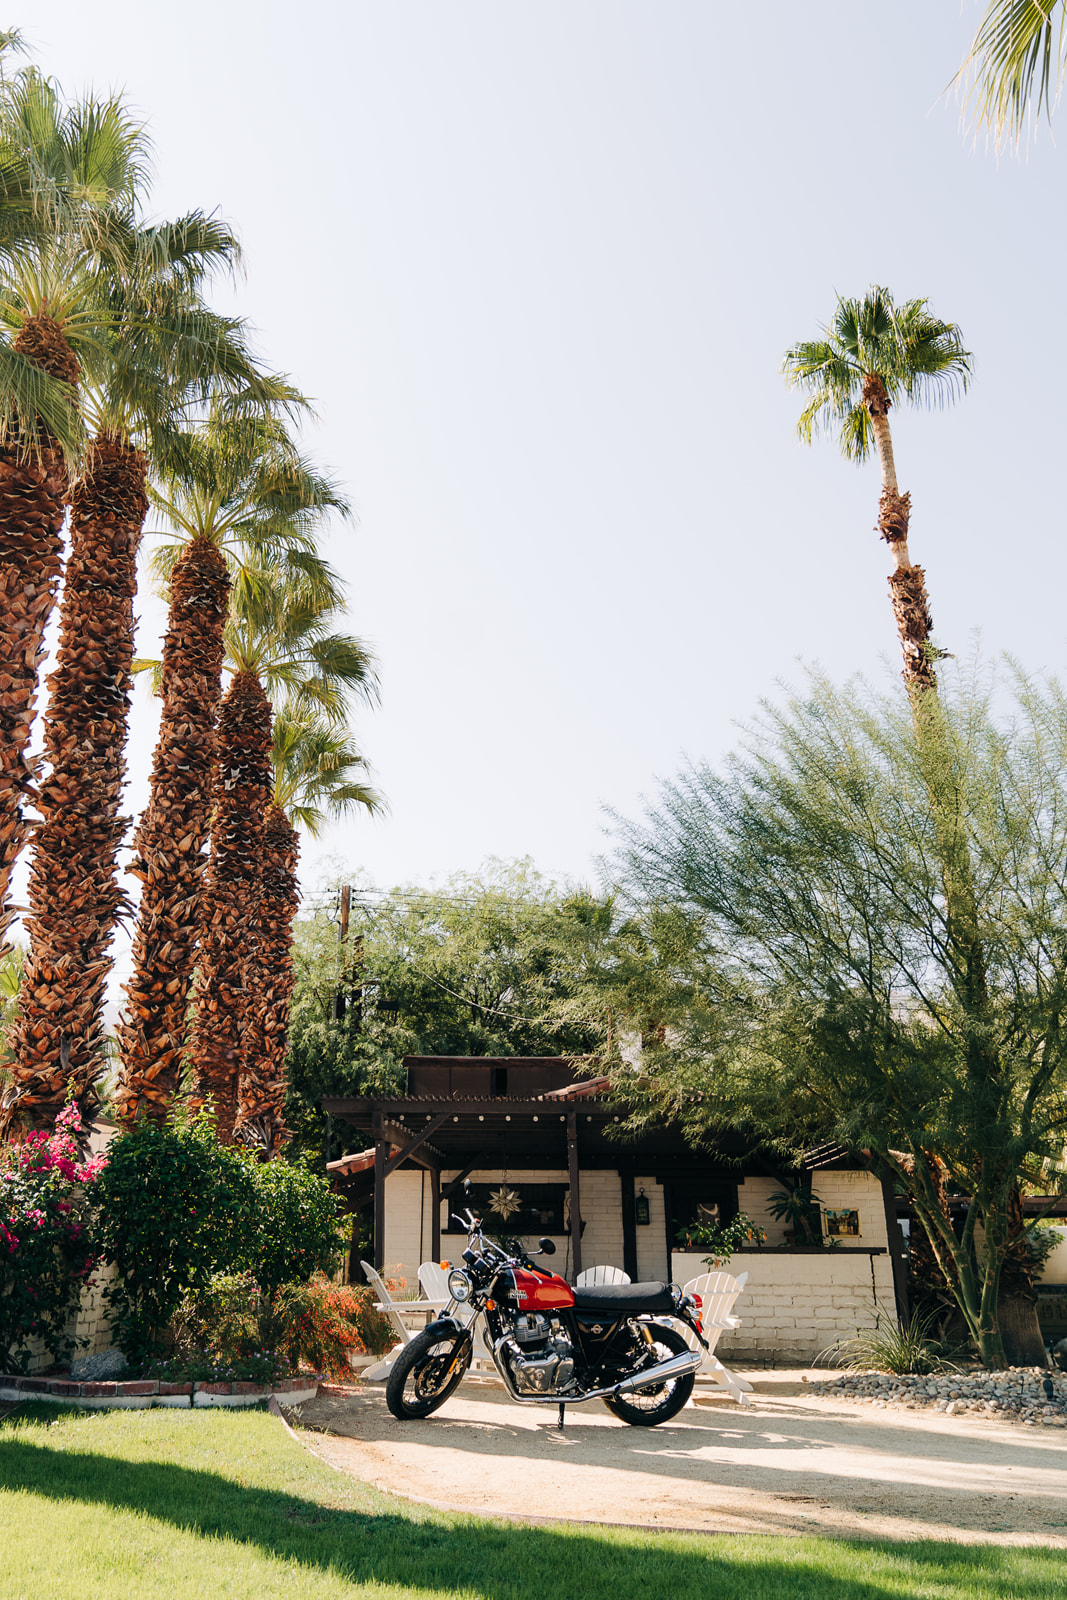 Motorcycle in front of house with large palm trees